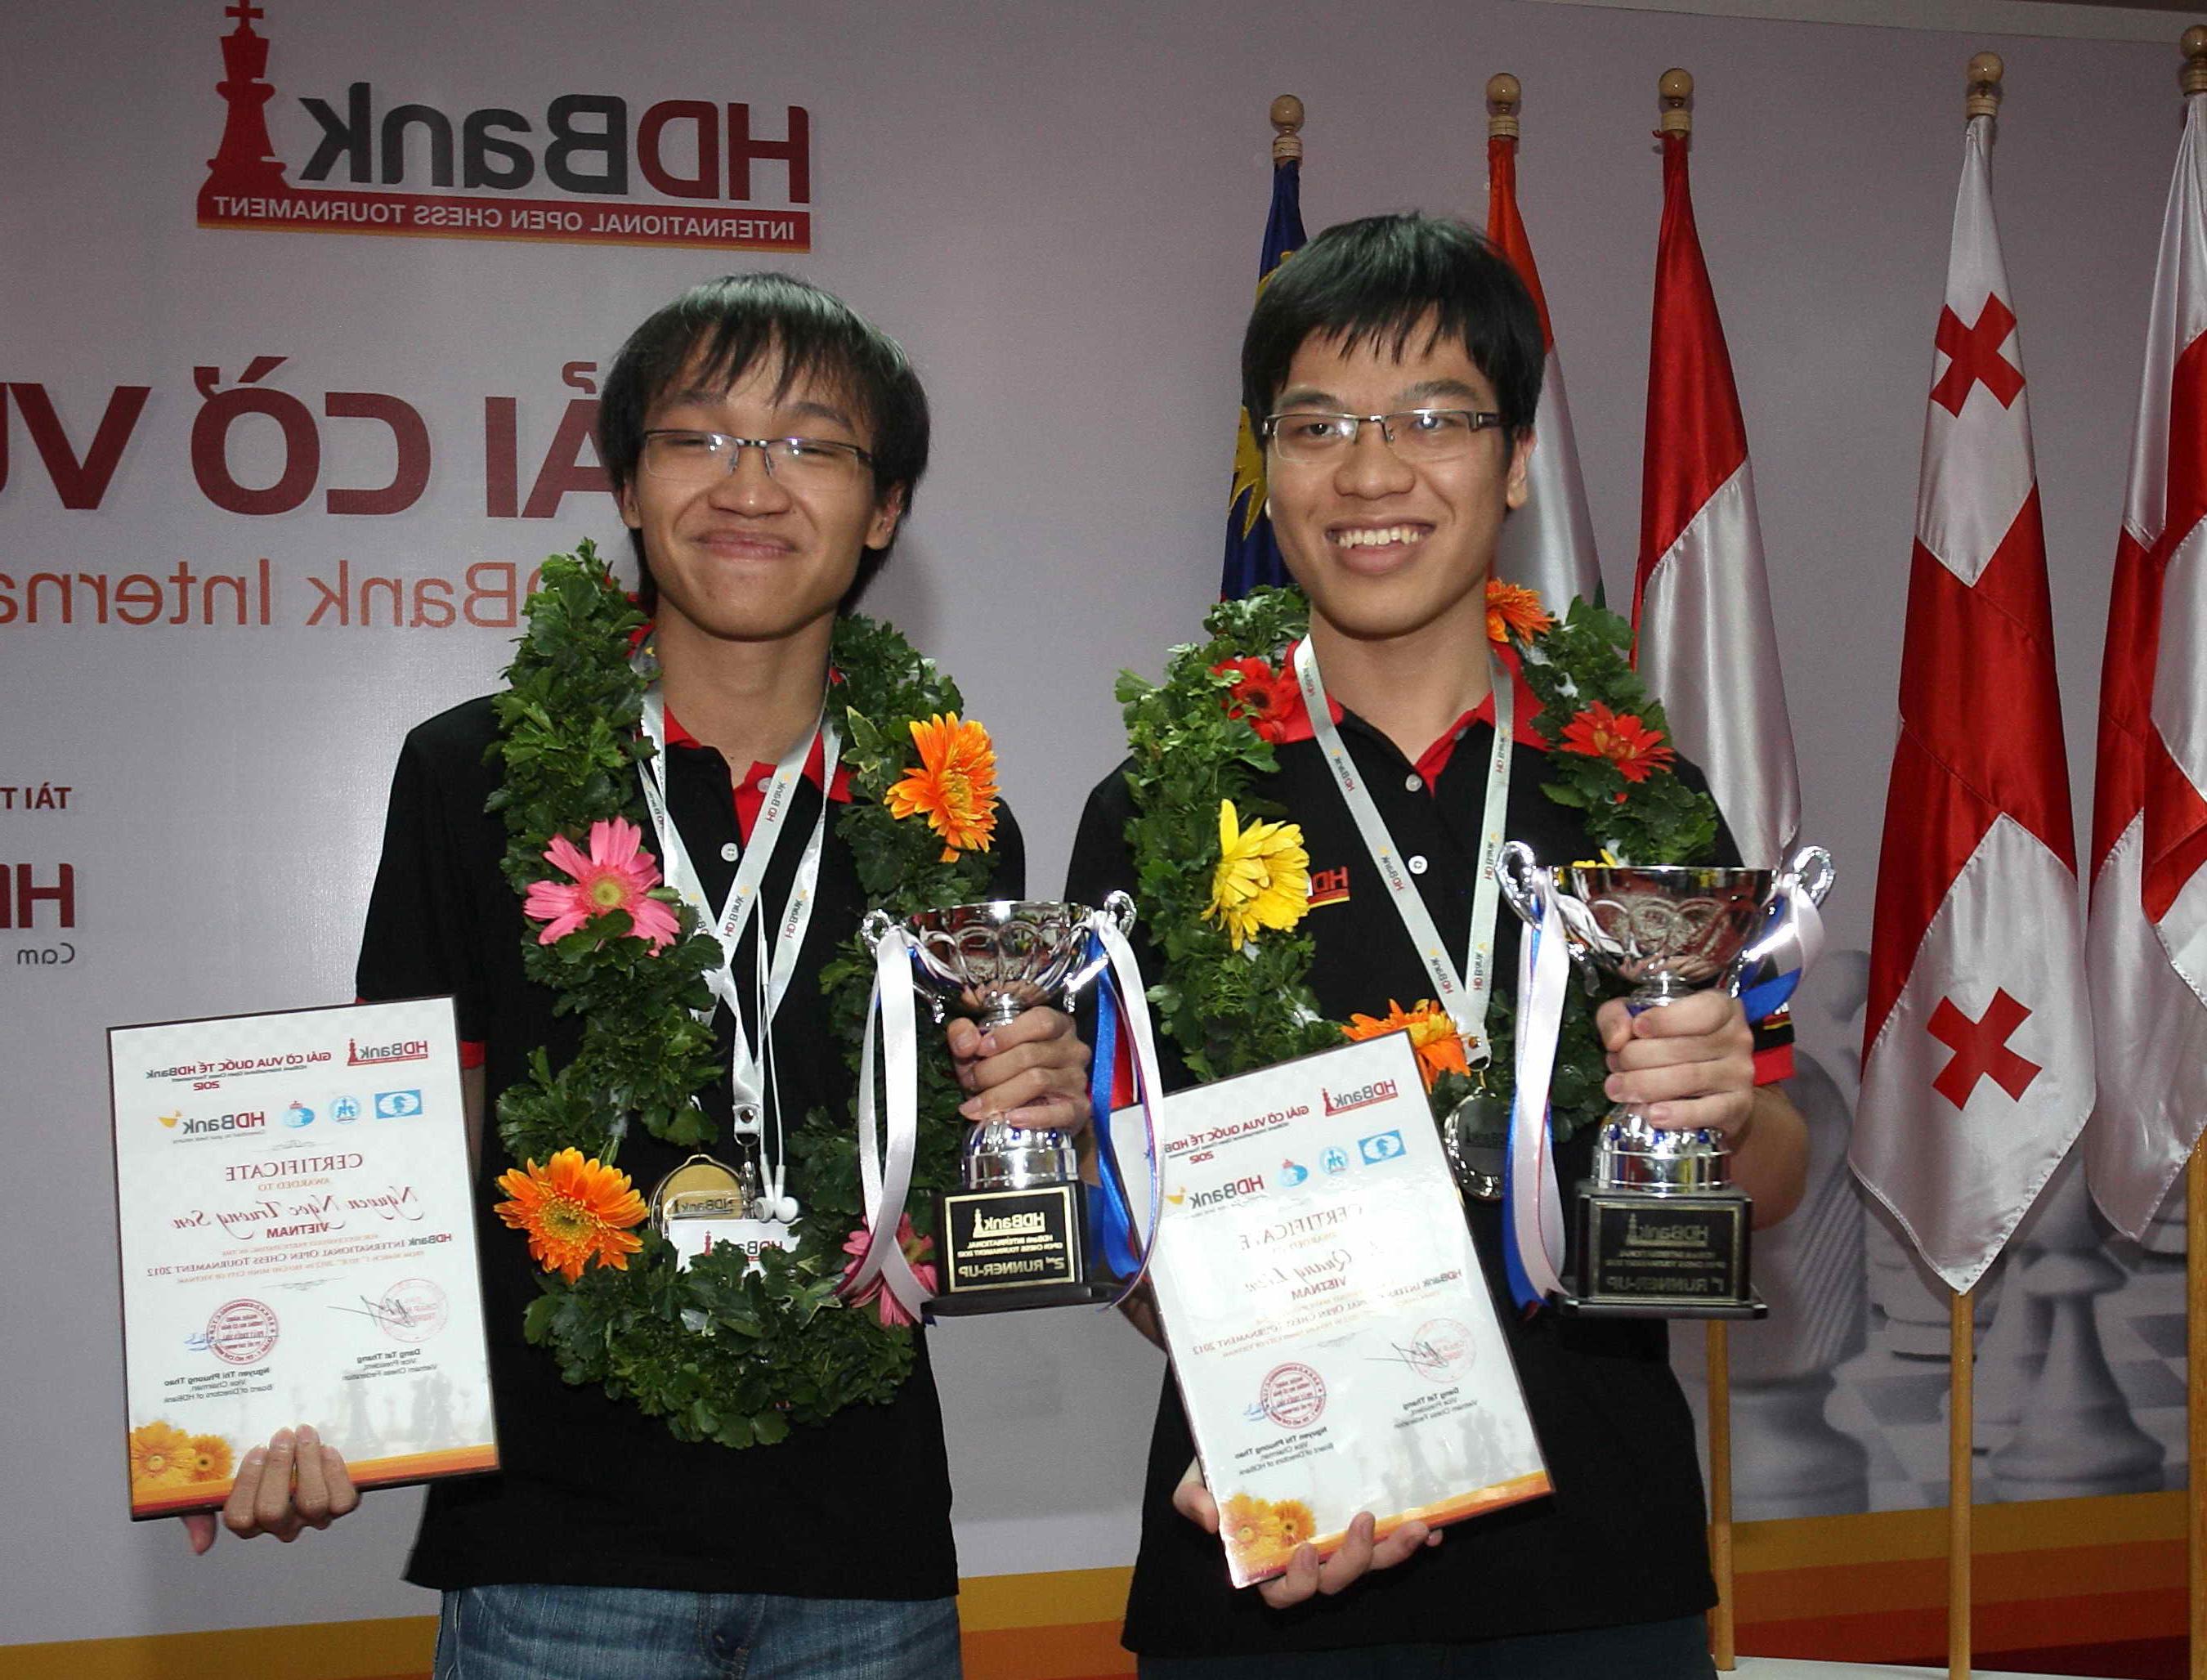  Nguyen Ngoc Truong Son (right) and grandmaster Le Quang Liem